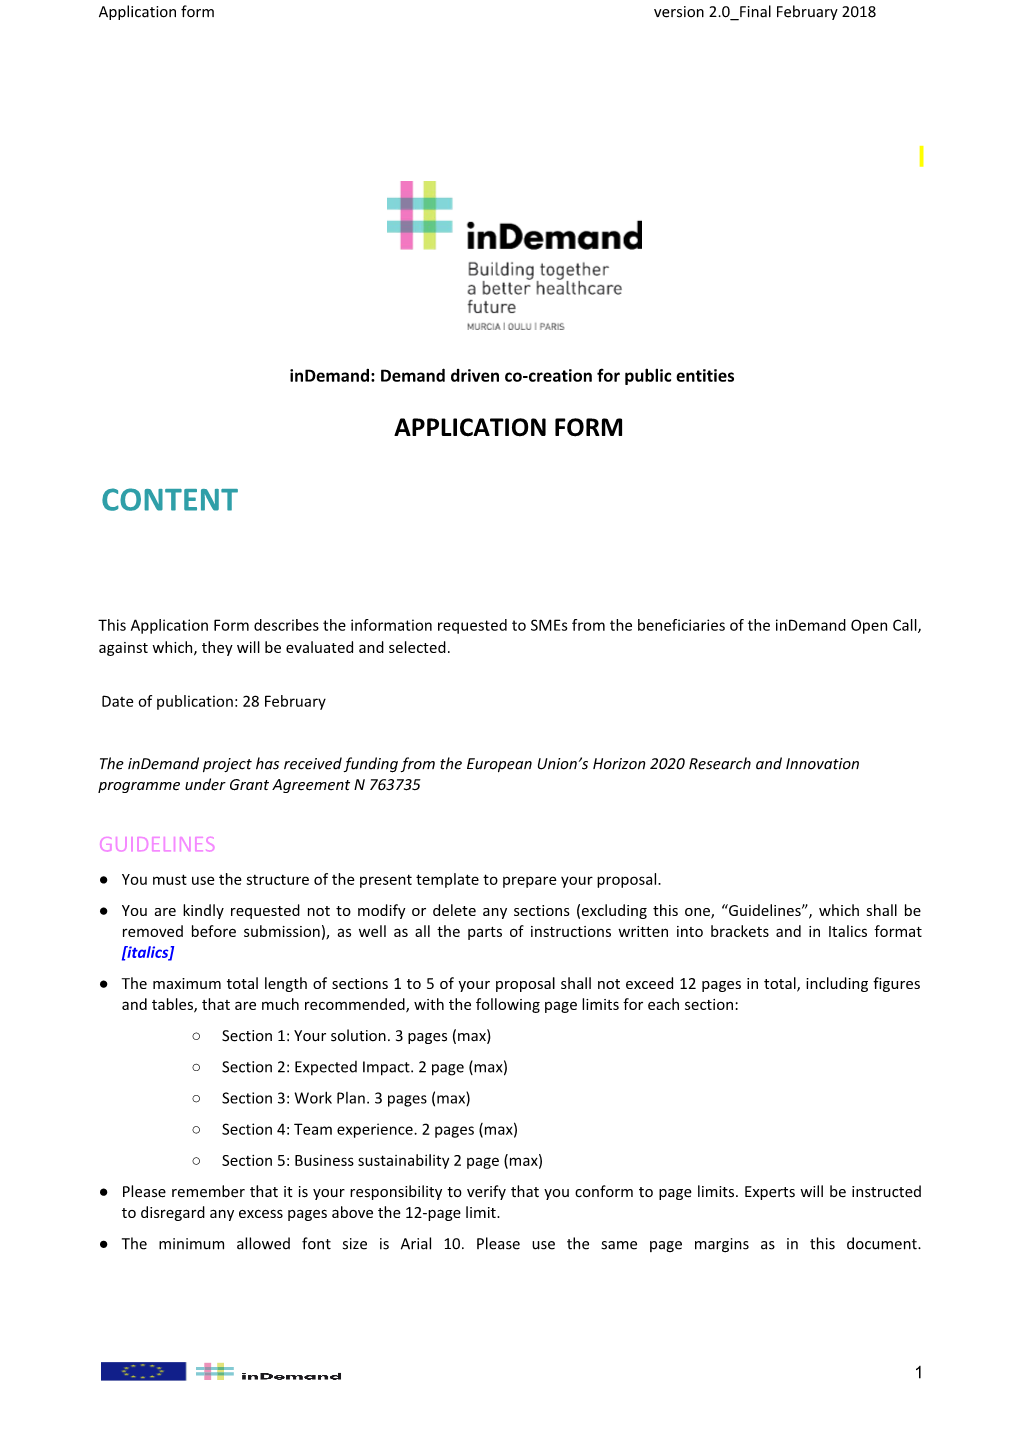 Indemand: Demand Driven Co-Creation for Public Entities